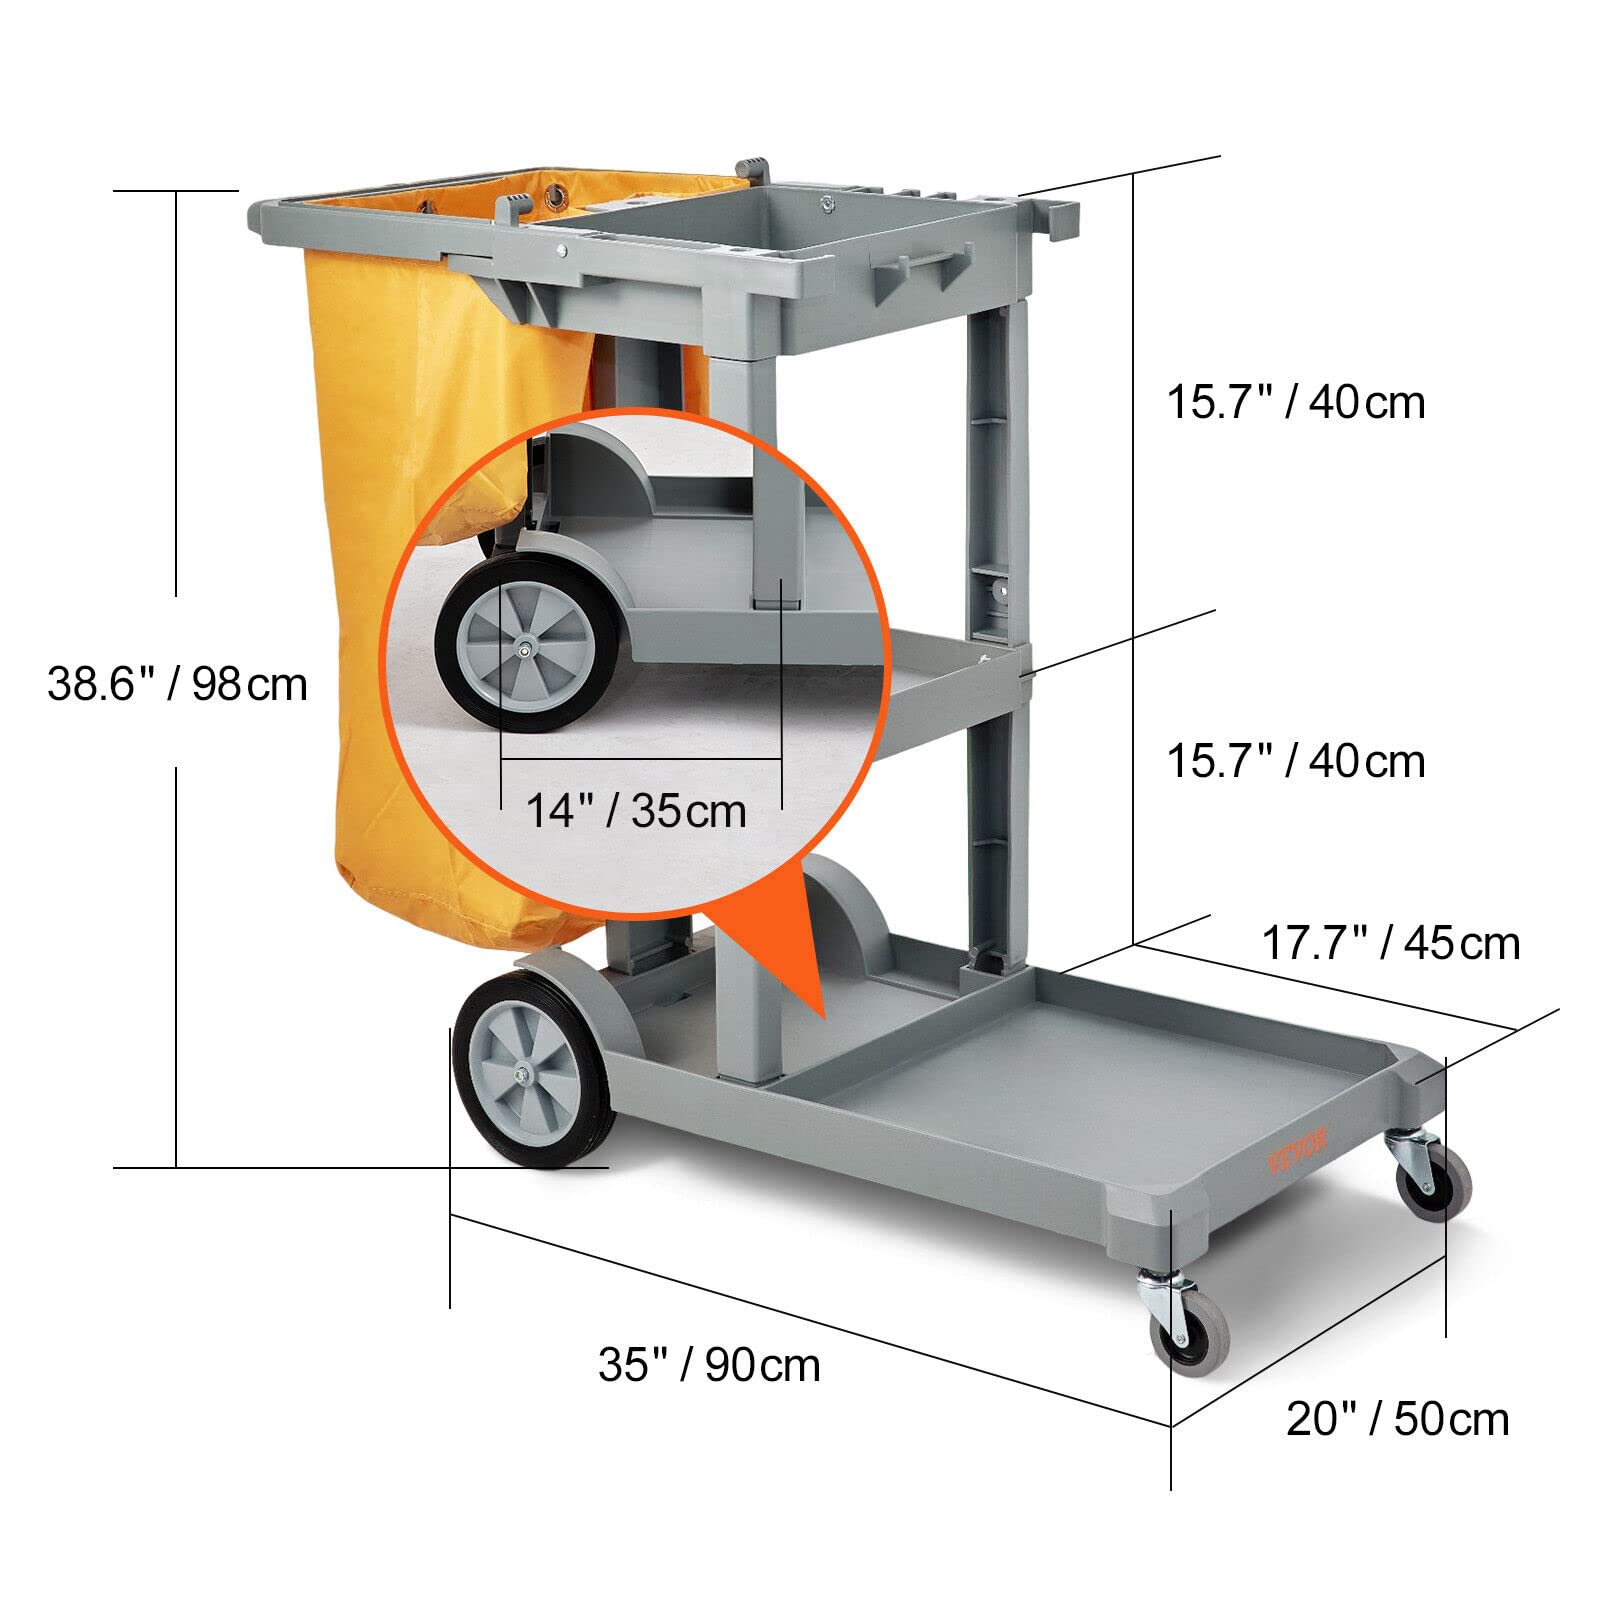 Commercial Janitorial Trolley 3-Shelf Cleaning Cart Wheeled with PVC Bag for Housekeeping Office, Stores, Schools